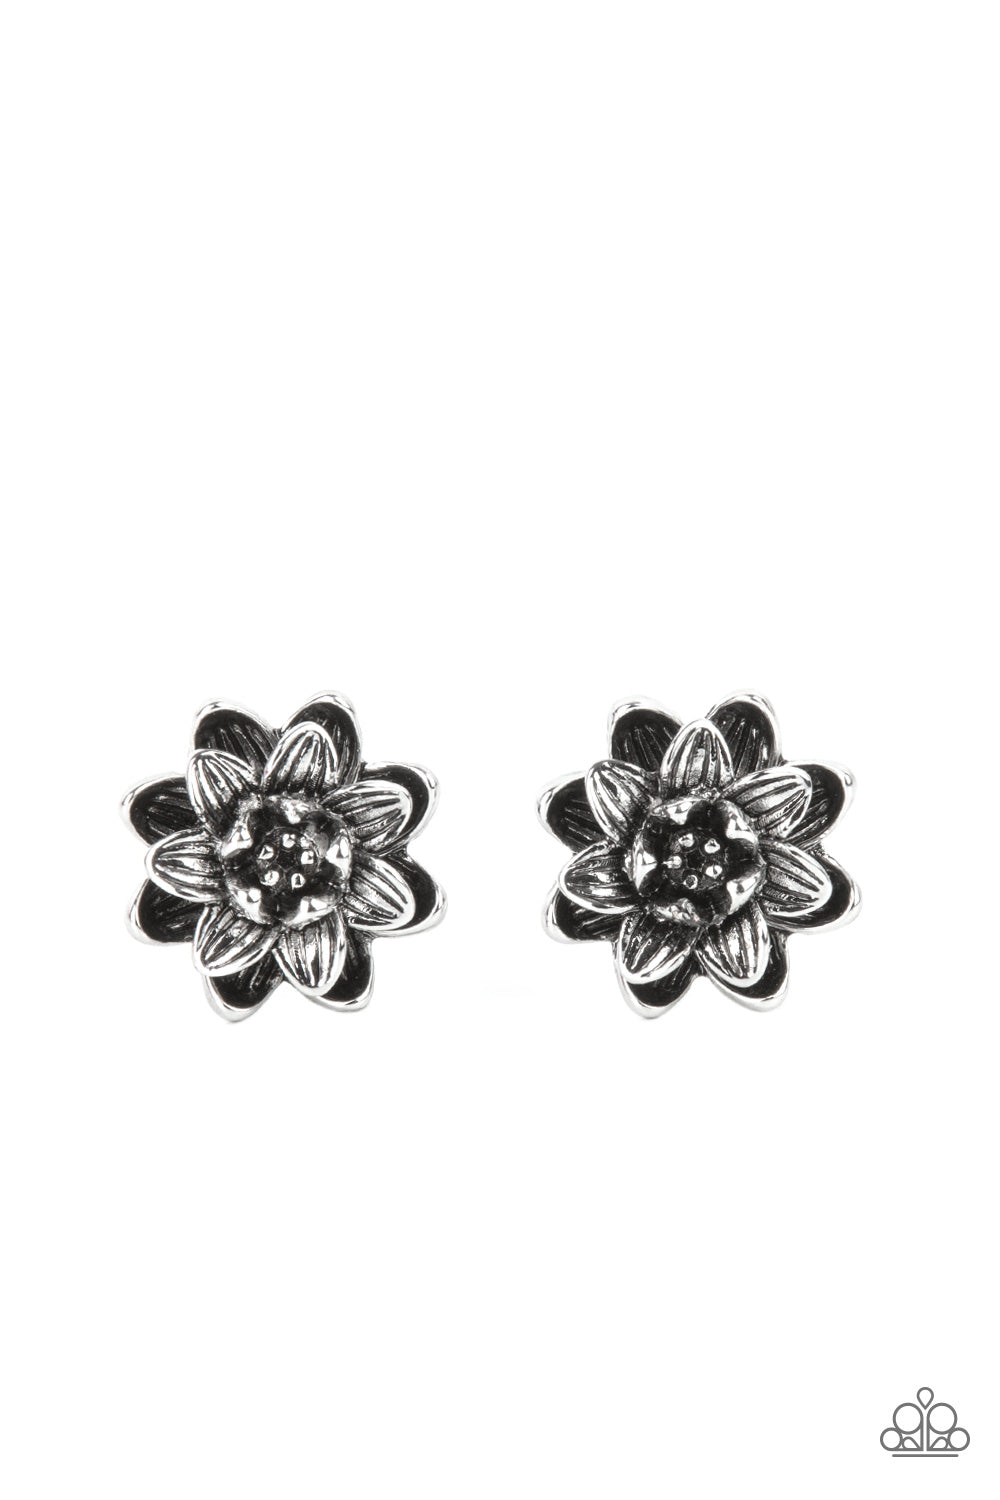 Water Lily Love Silver Post Earrings - Paparazzi